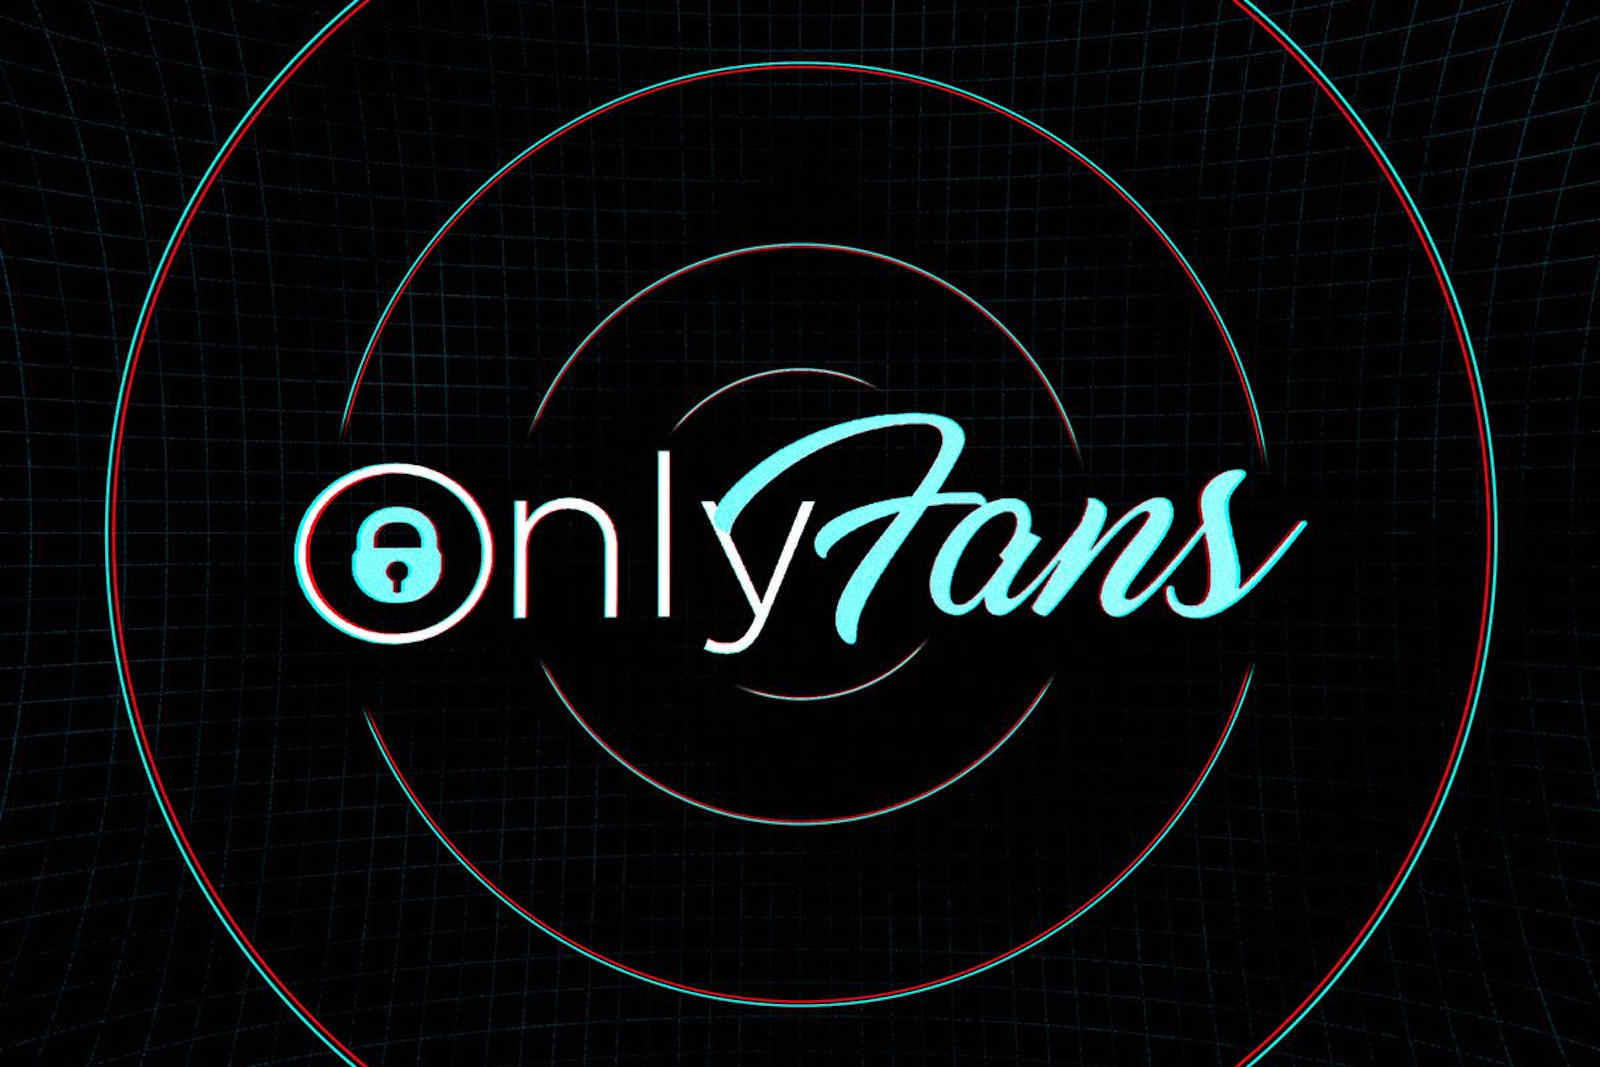 is there a way to download protected videos from onlyfans